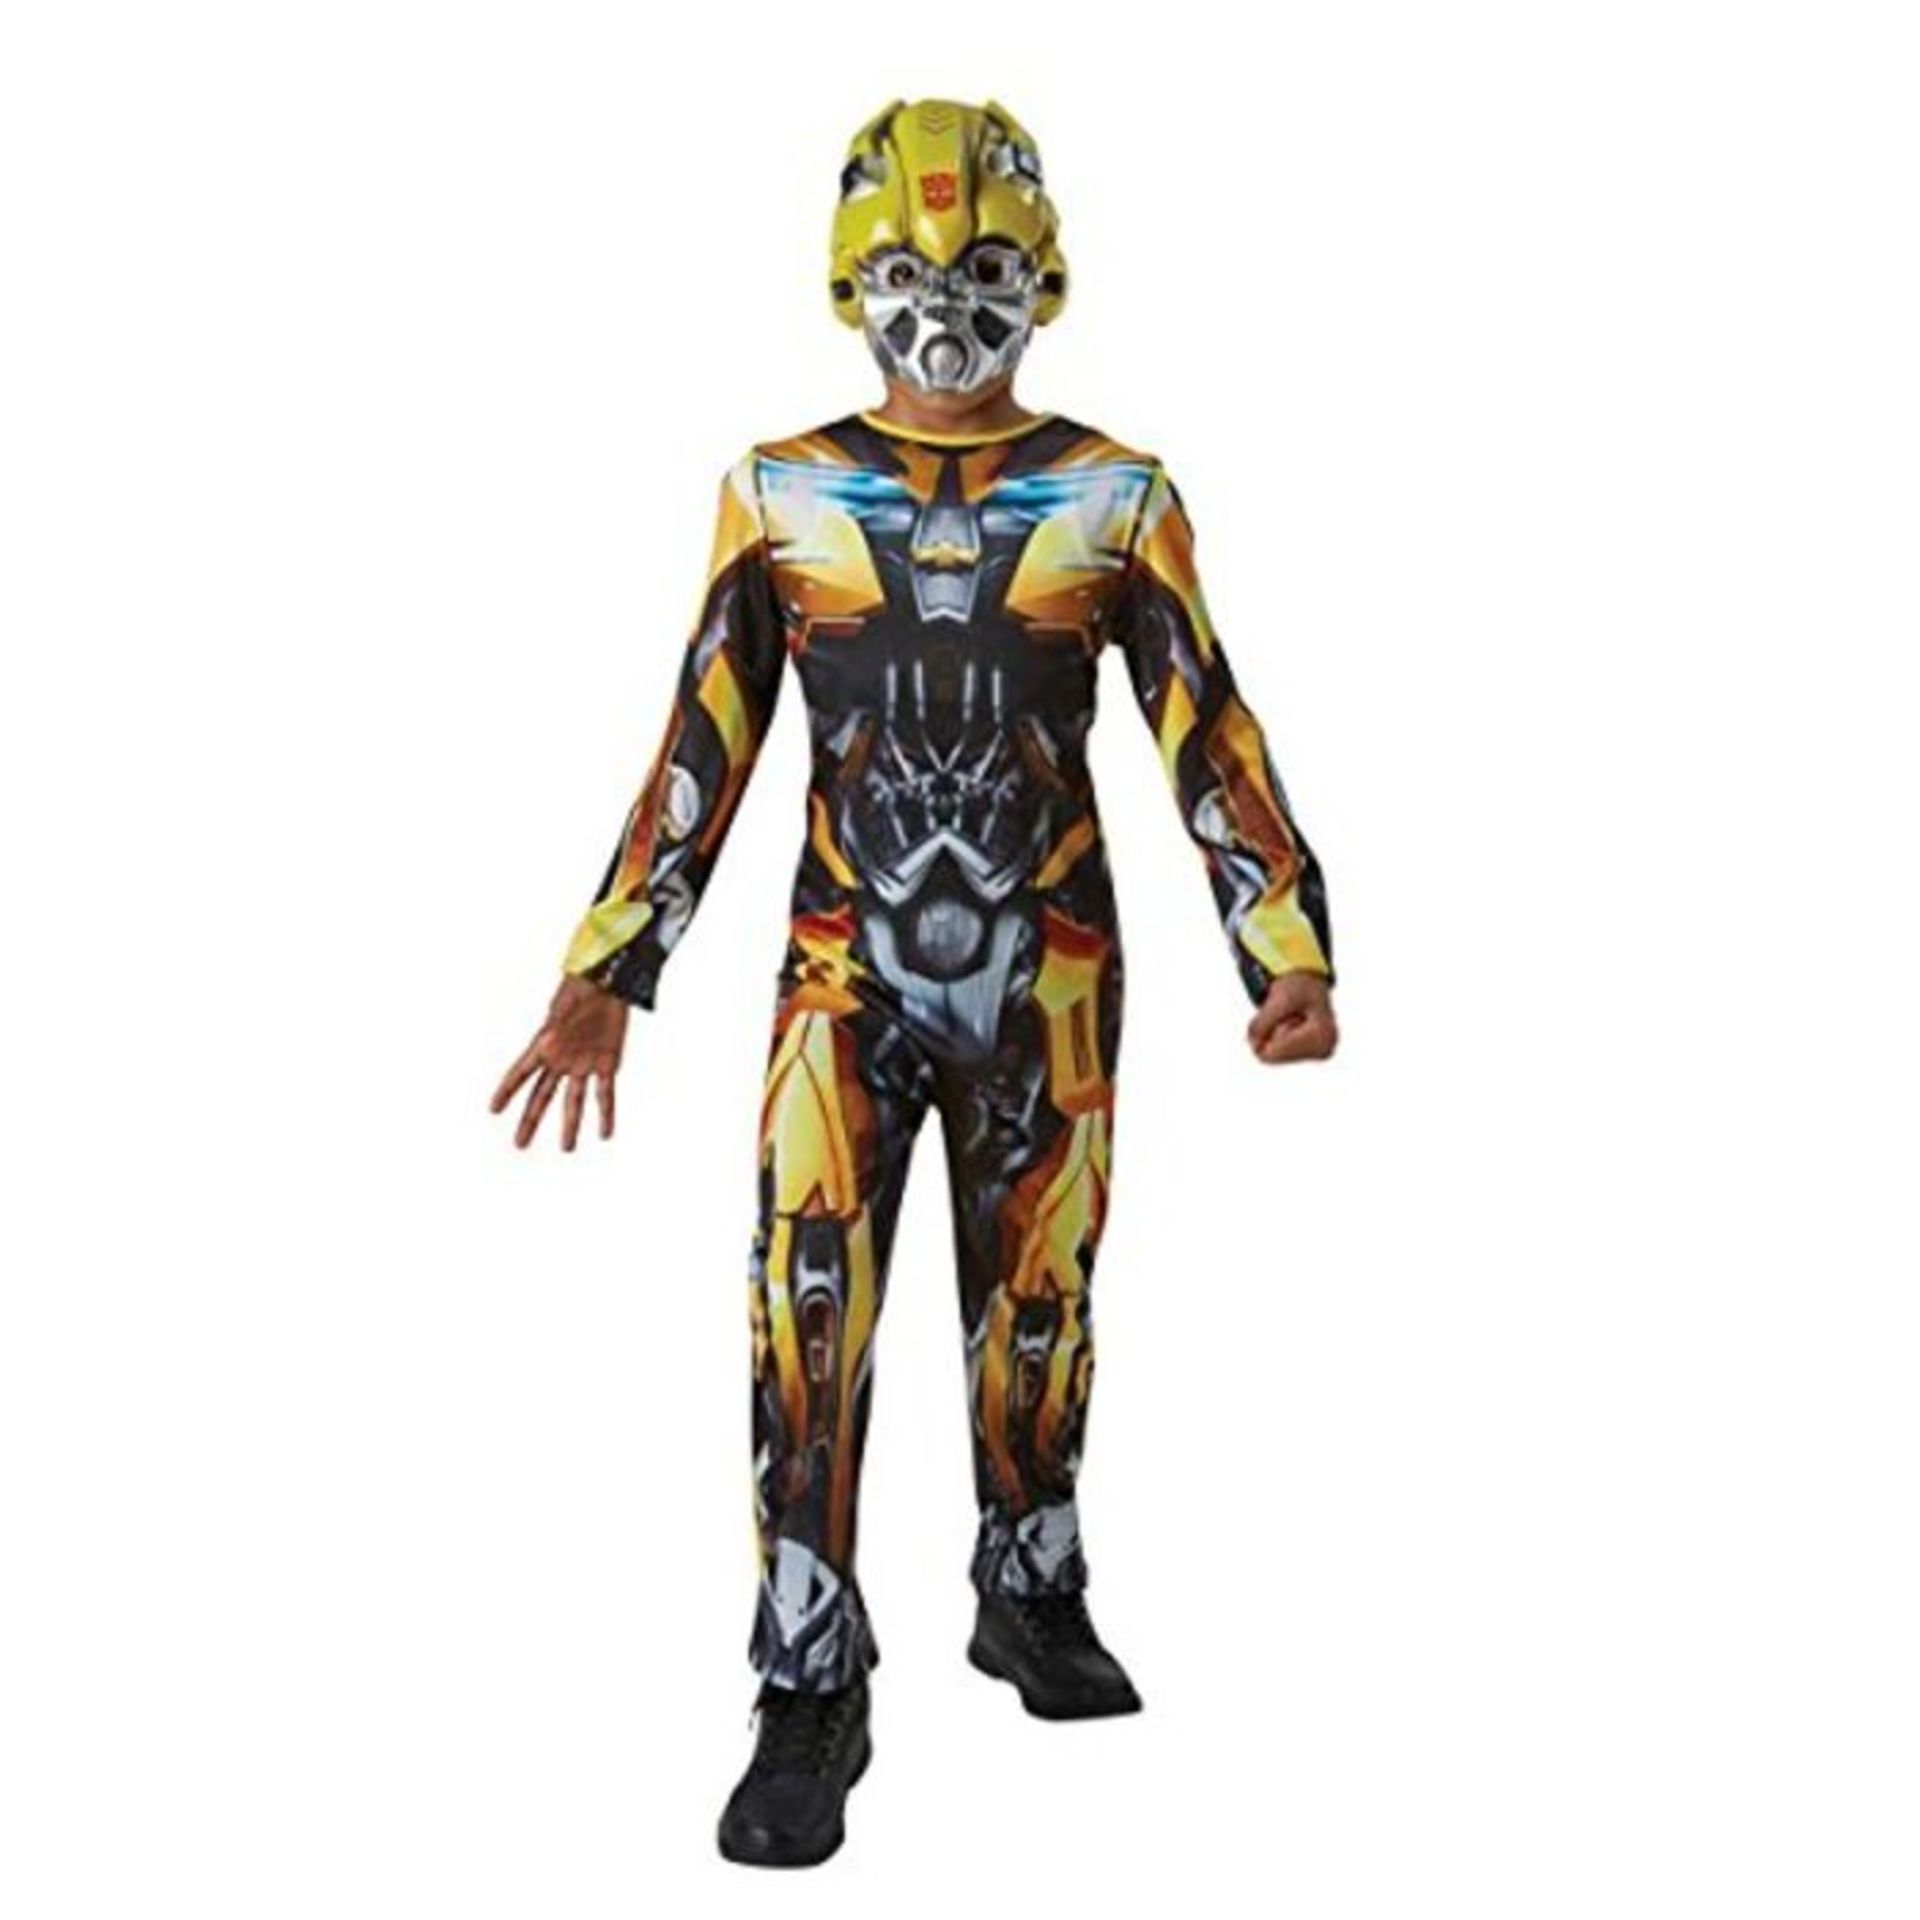 Rubie's Official Transformers The Last Knight Bumblebee Childs Costume, Small 3-4 Year